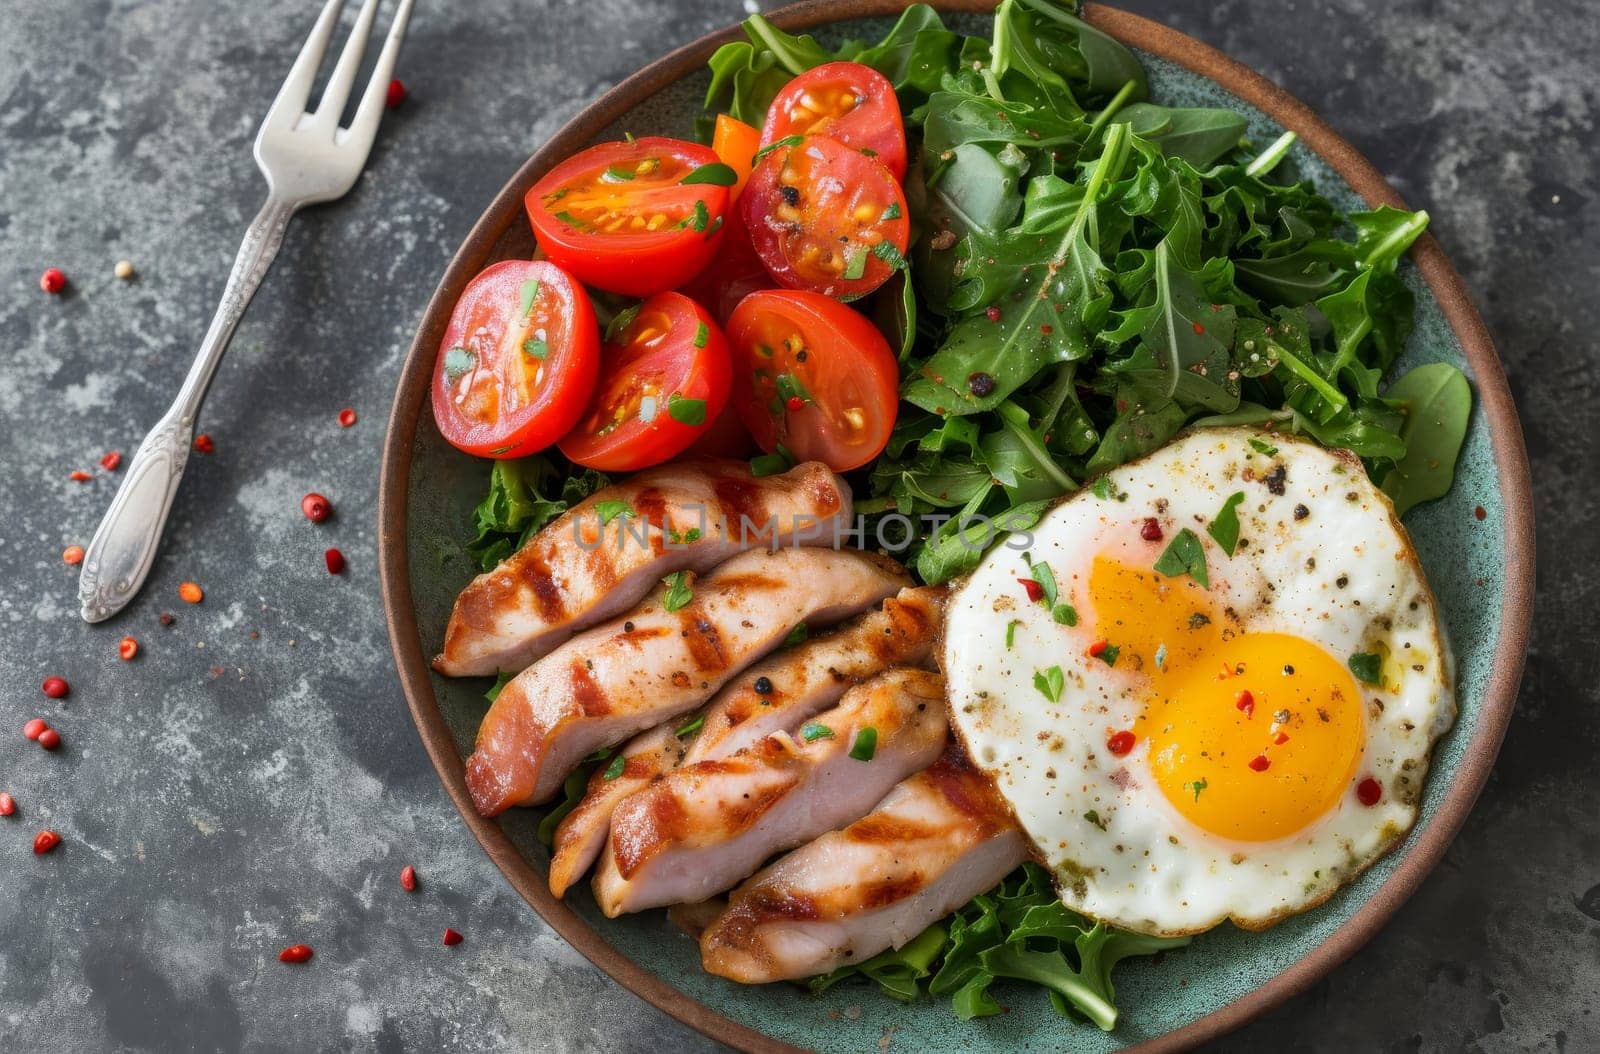 Breakfast with chicken and egg by gcm